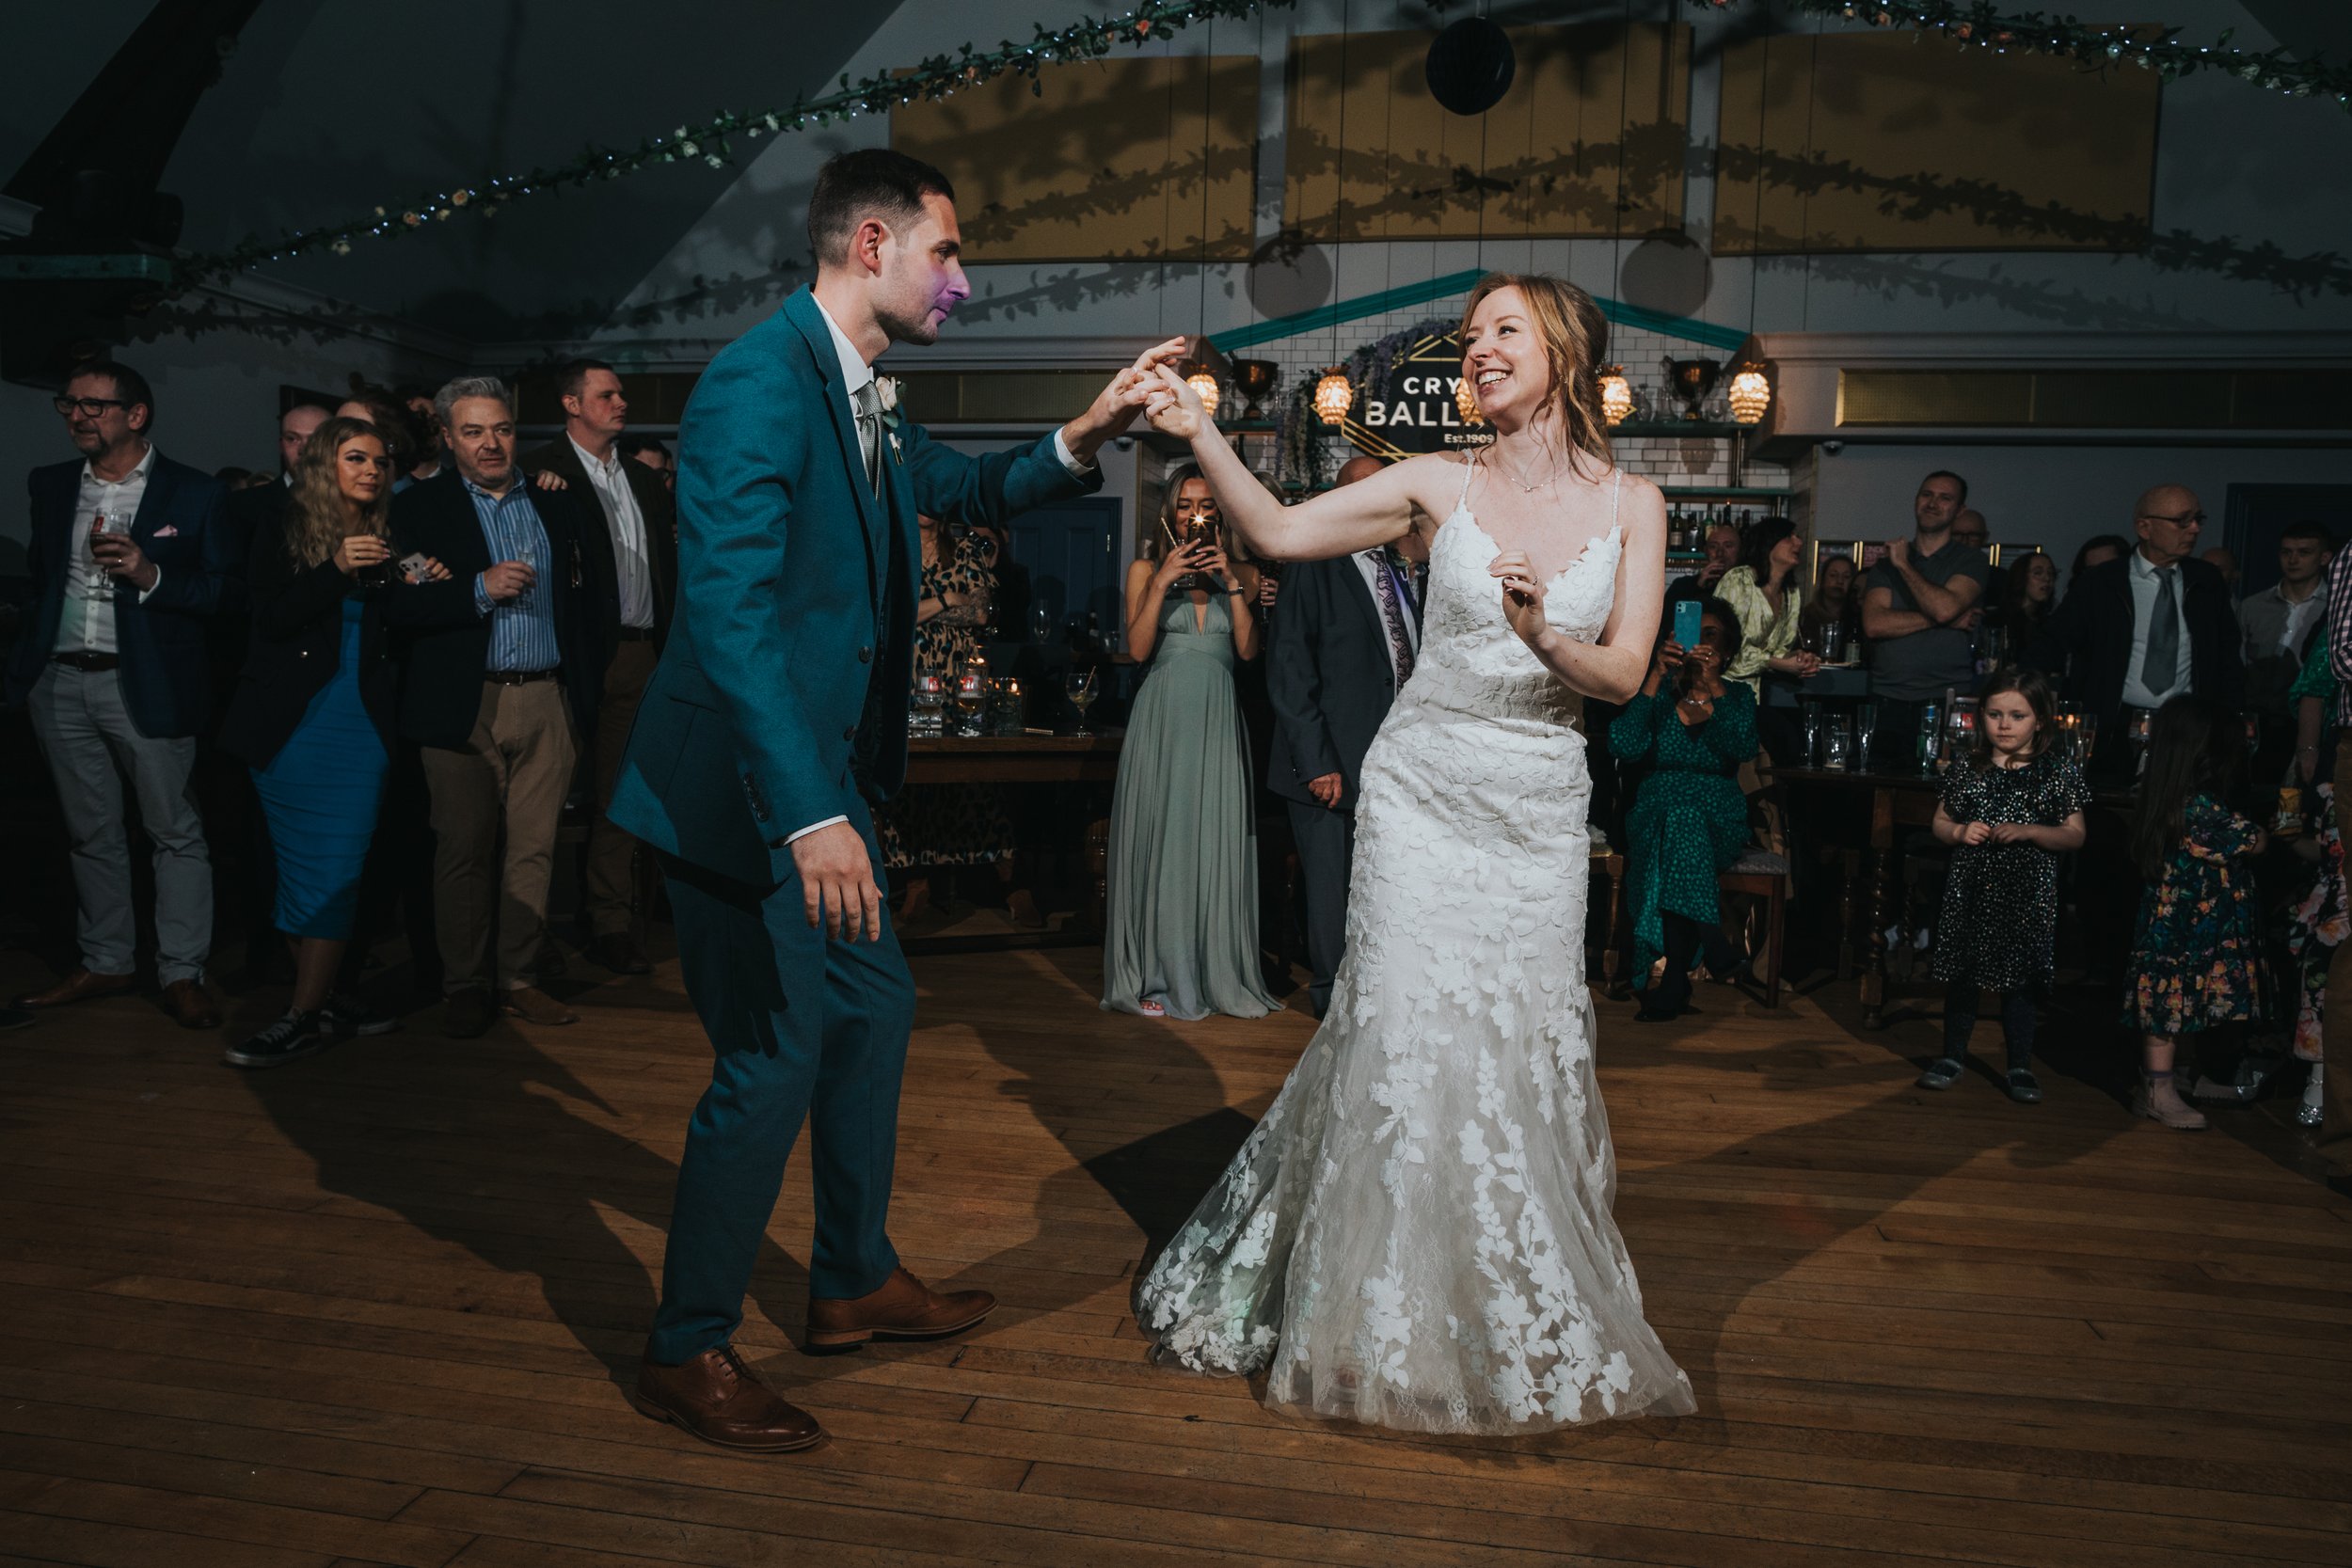 Bride laughing as she dances with her husband at the Crystal Ballroom, Glossop, Derbyshire.